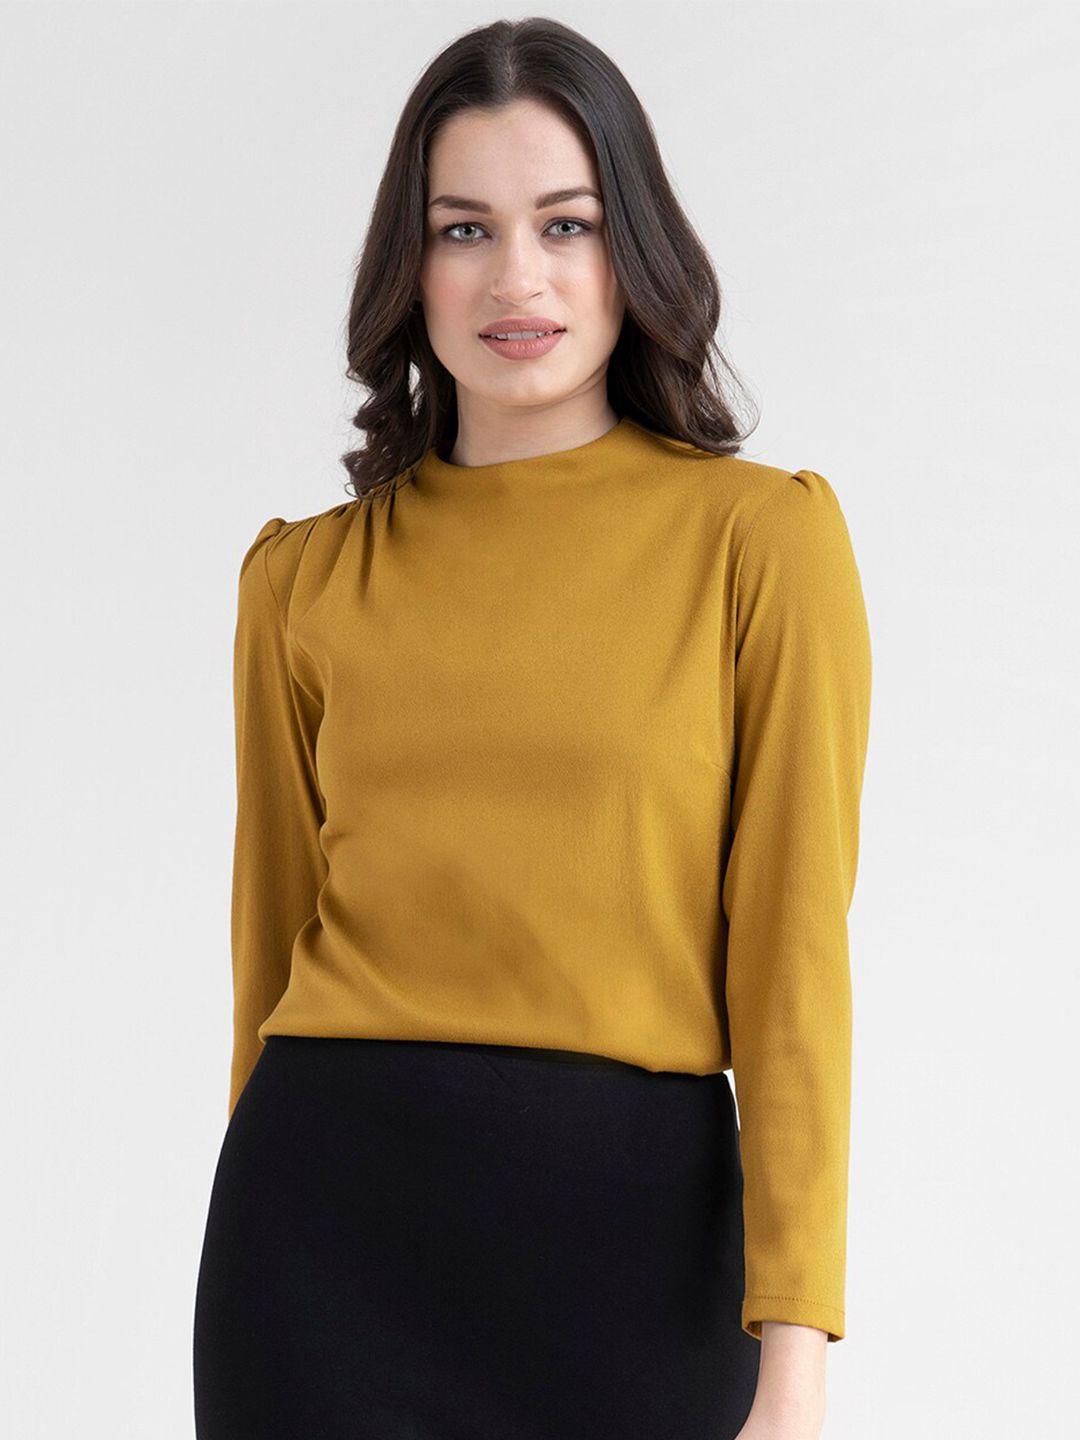 fablestreet mustard yellow gather detail top